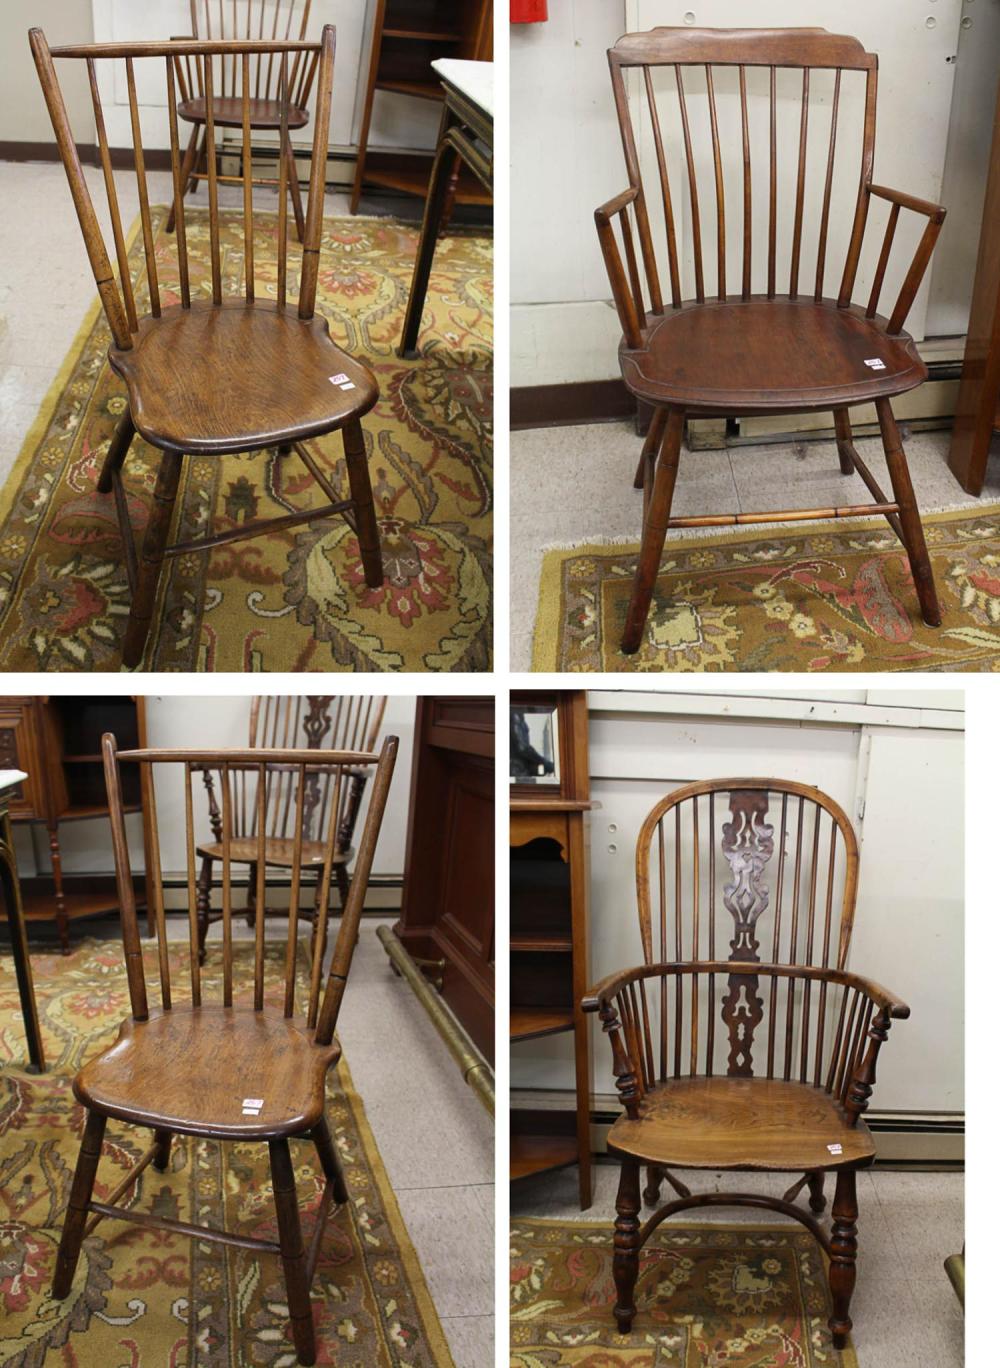 FOUR ANTIQUE WINDSOR CHAIRSFOUR